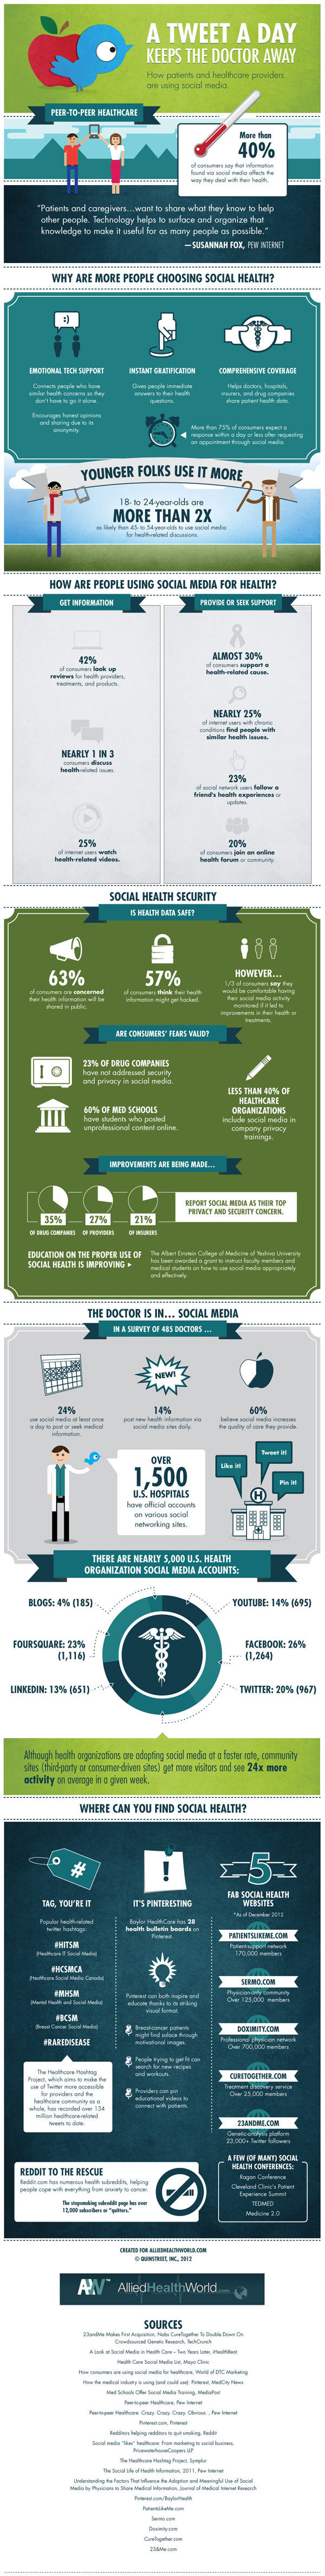 Infographic-How-Are-Consumers-Using-Social-Media-for-Health